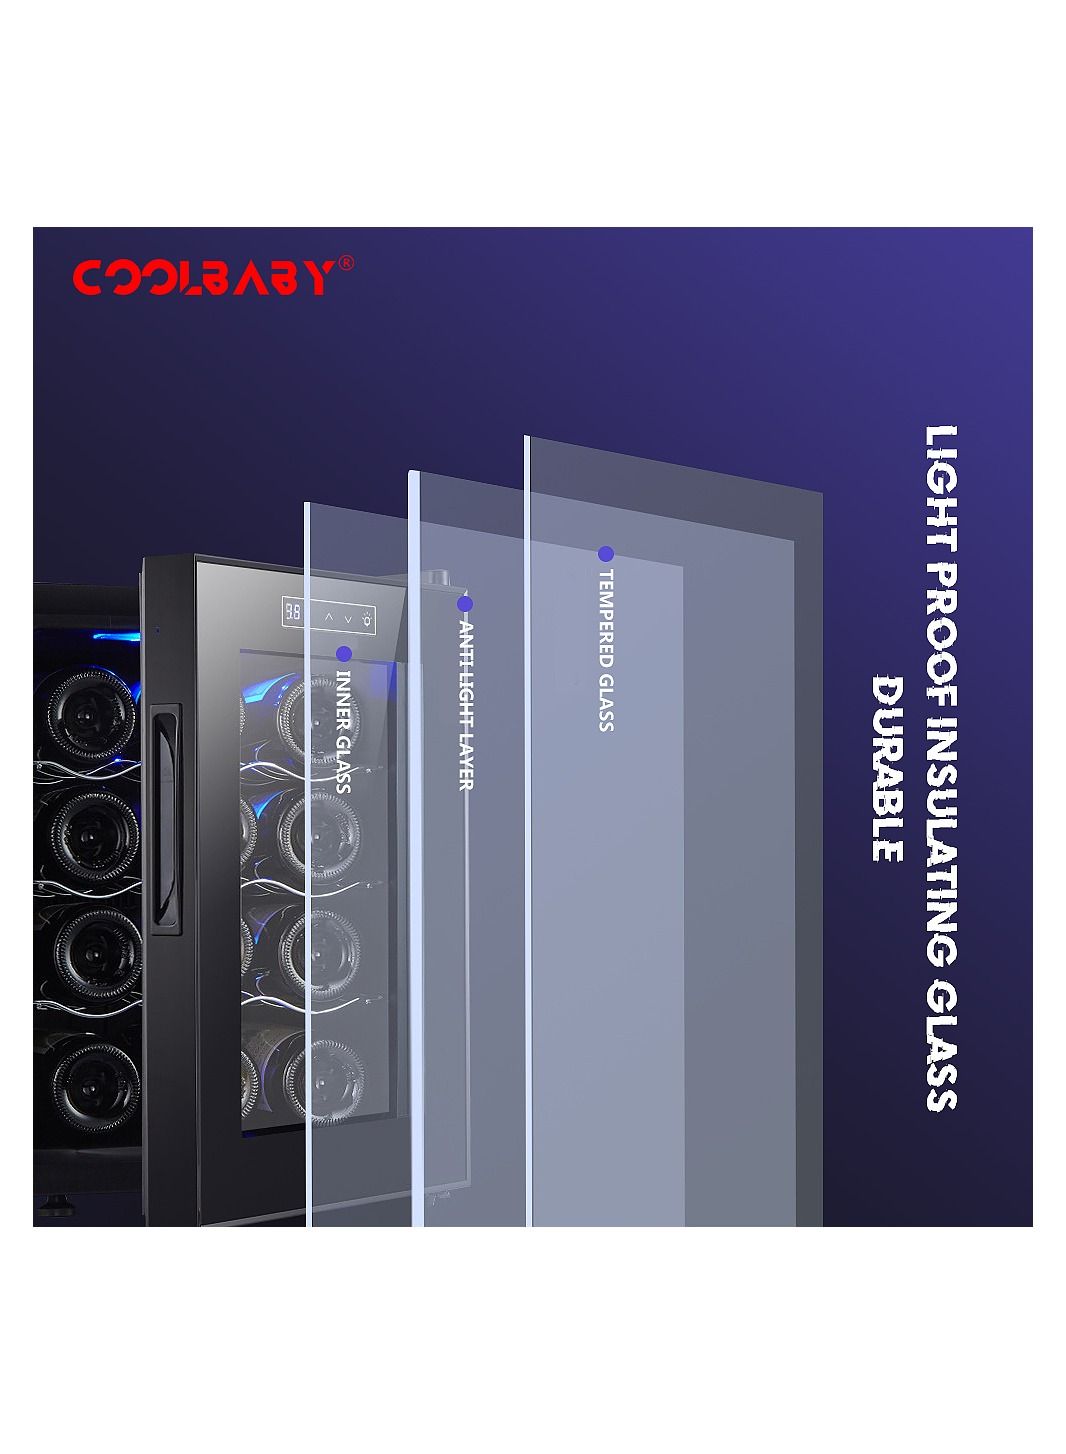 COOLBABY 12 Bottles of Constant Temperature & Humidity Electronic Beverage Wine Cooler Freestanding Compact Mini Wine Fridge Cabinet Refrigerator 